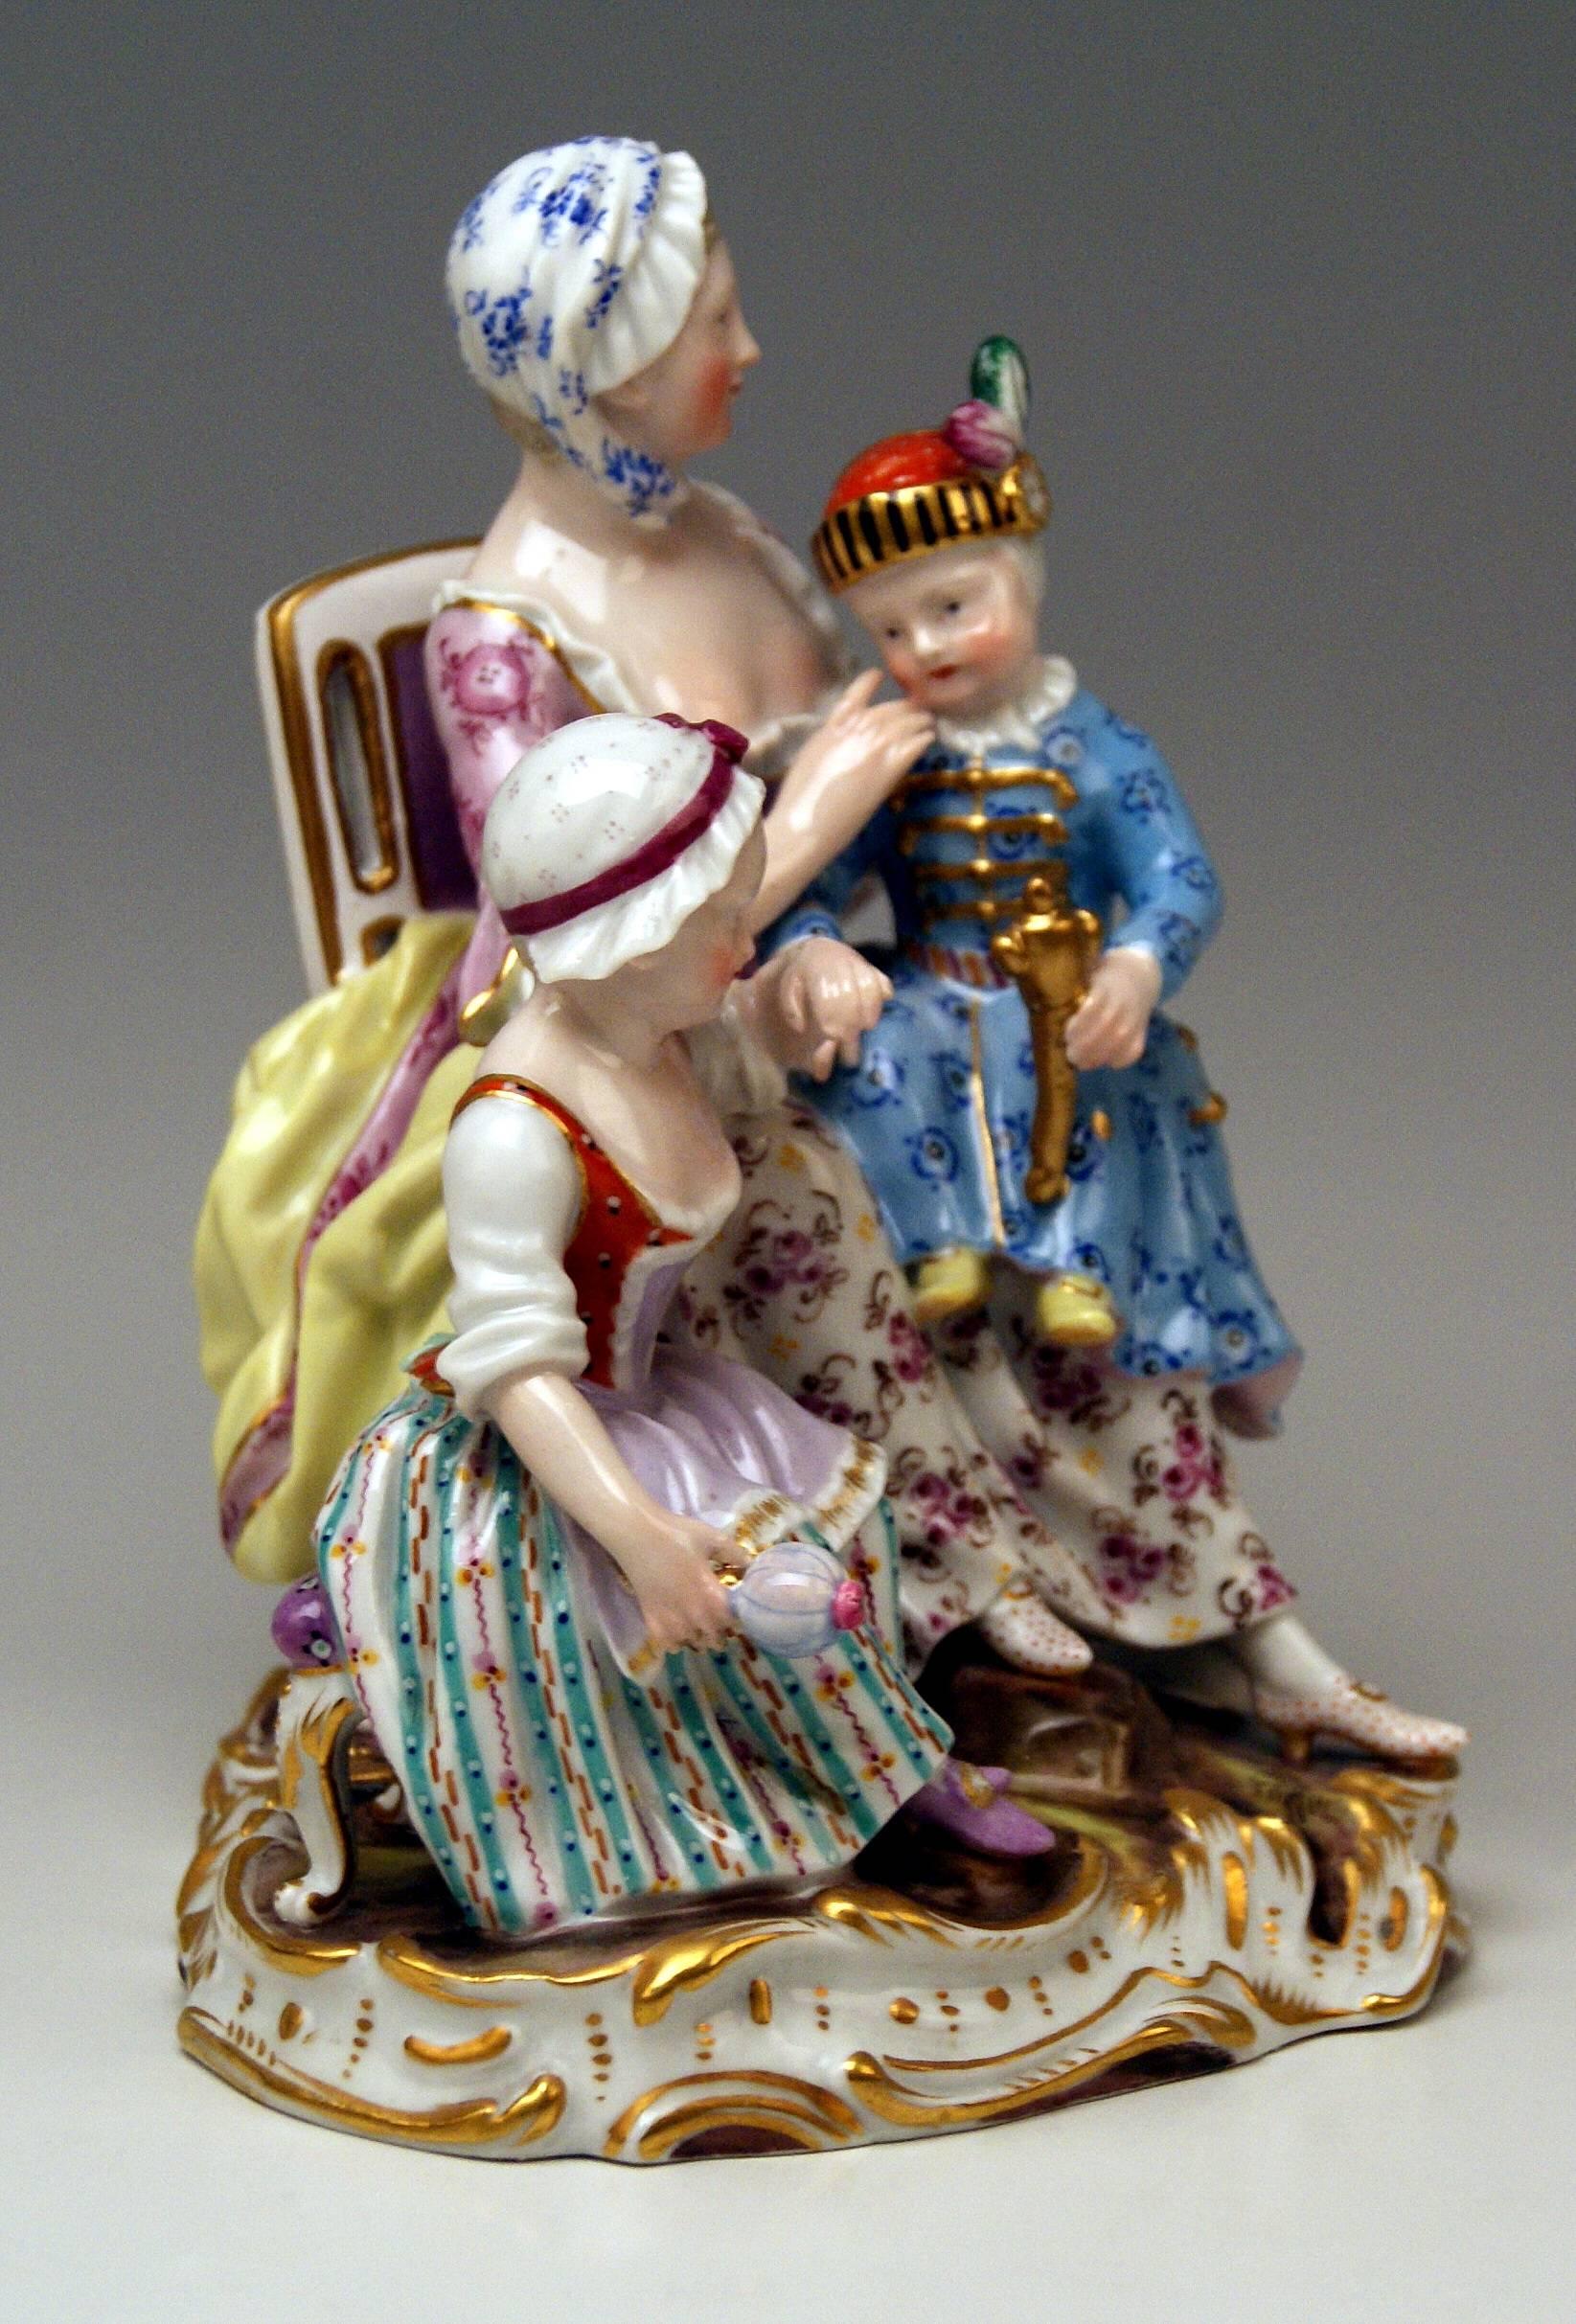 Meissen most remarkable figurine group: mother with two children

Measures / dimensions:
Height: 6.89 inches / 17.5 cm 
Width: 5.90 inches / 15.0 cm 
Depth: 4.92 inches / 12.5 cm 

Manufactory: Meissen
Hallmarked: Blue Meissen Sword Mark